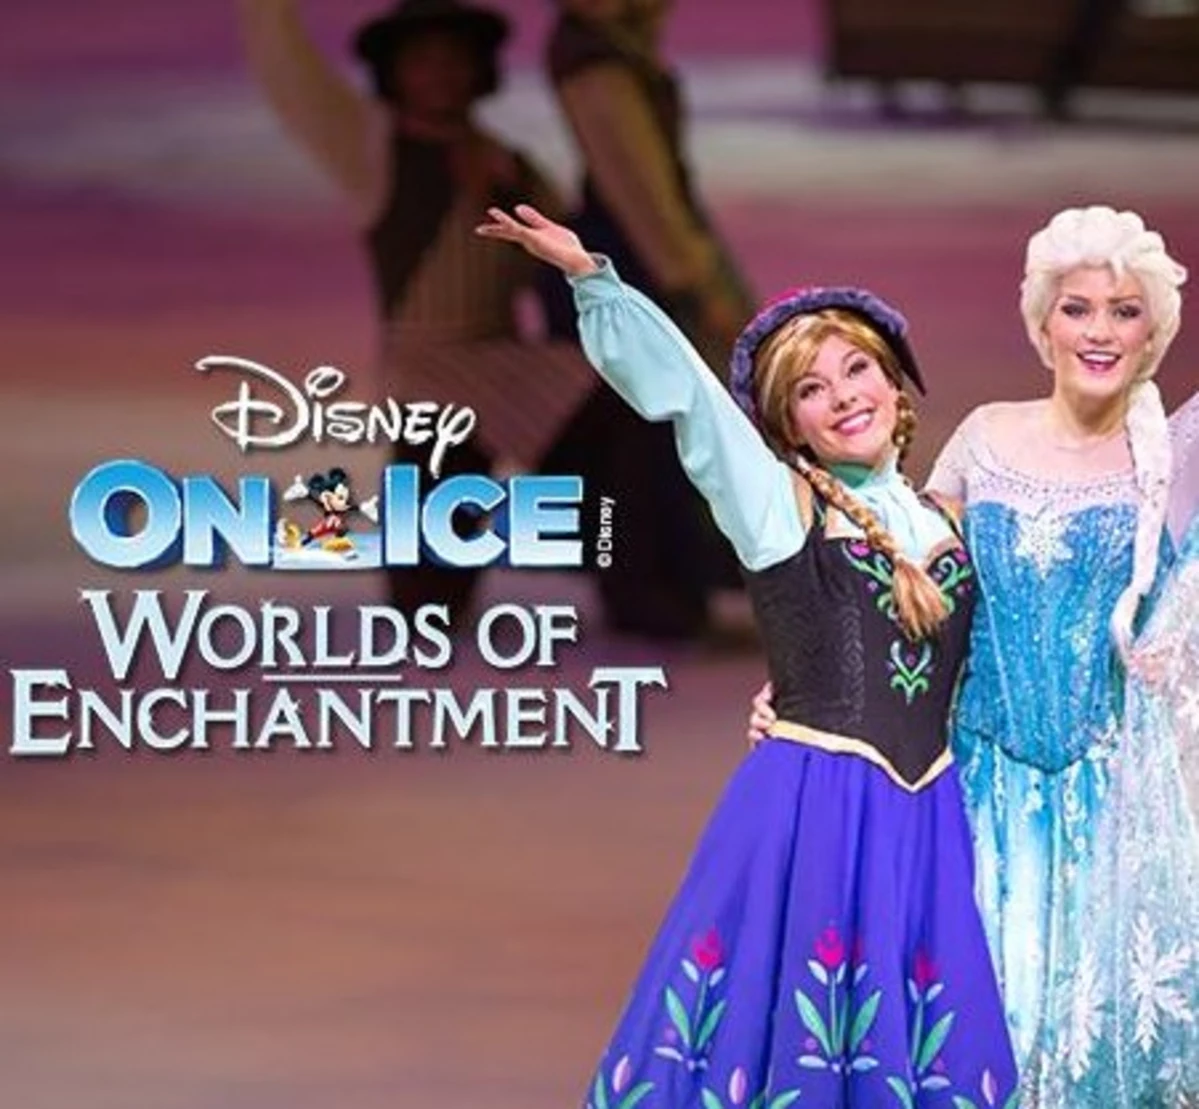 Here's How To Win Tickets For 'Disney On Ice' In Portland